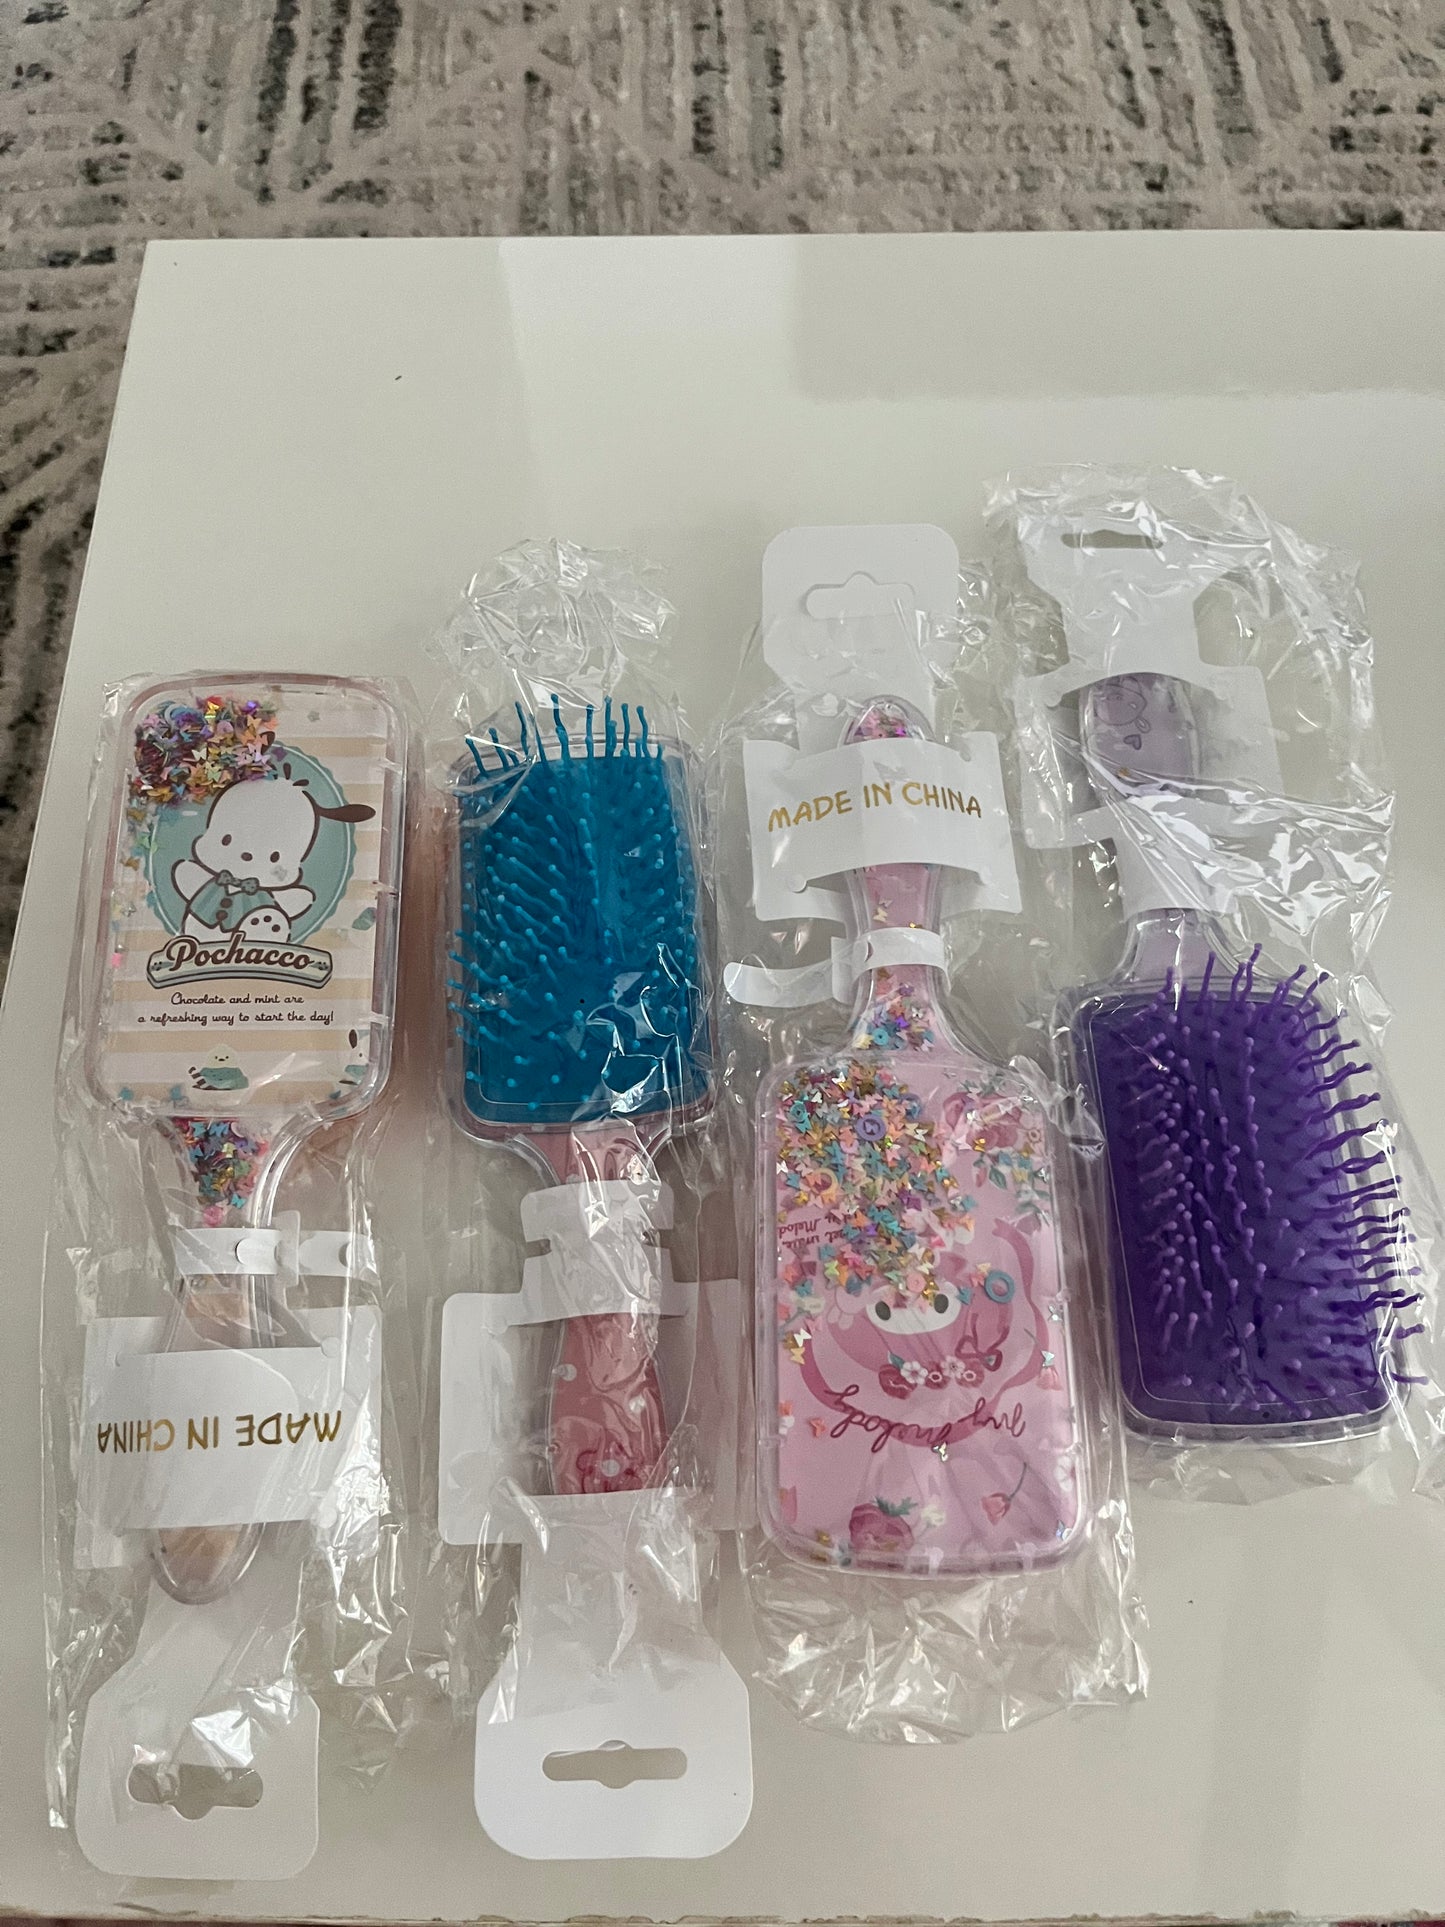 HK and friends hair brush